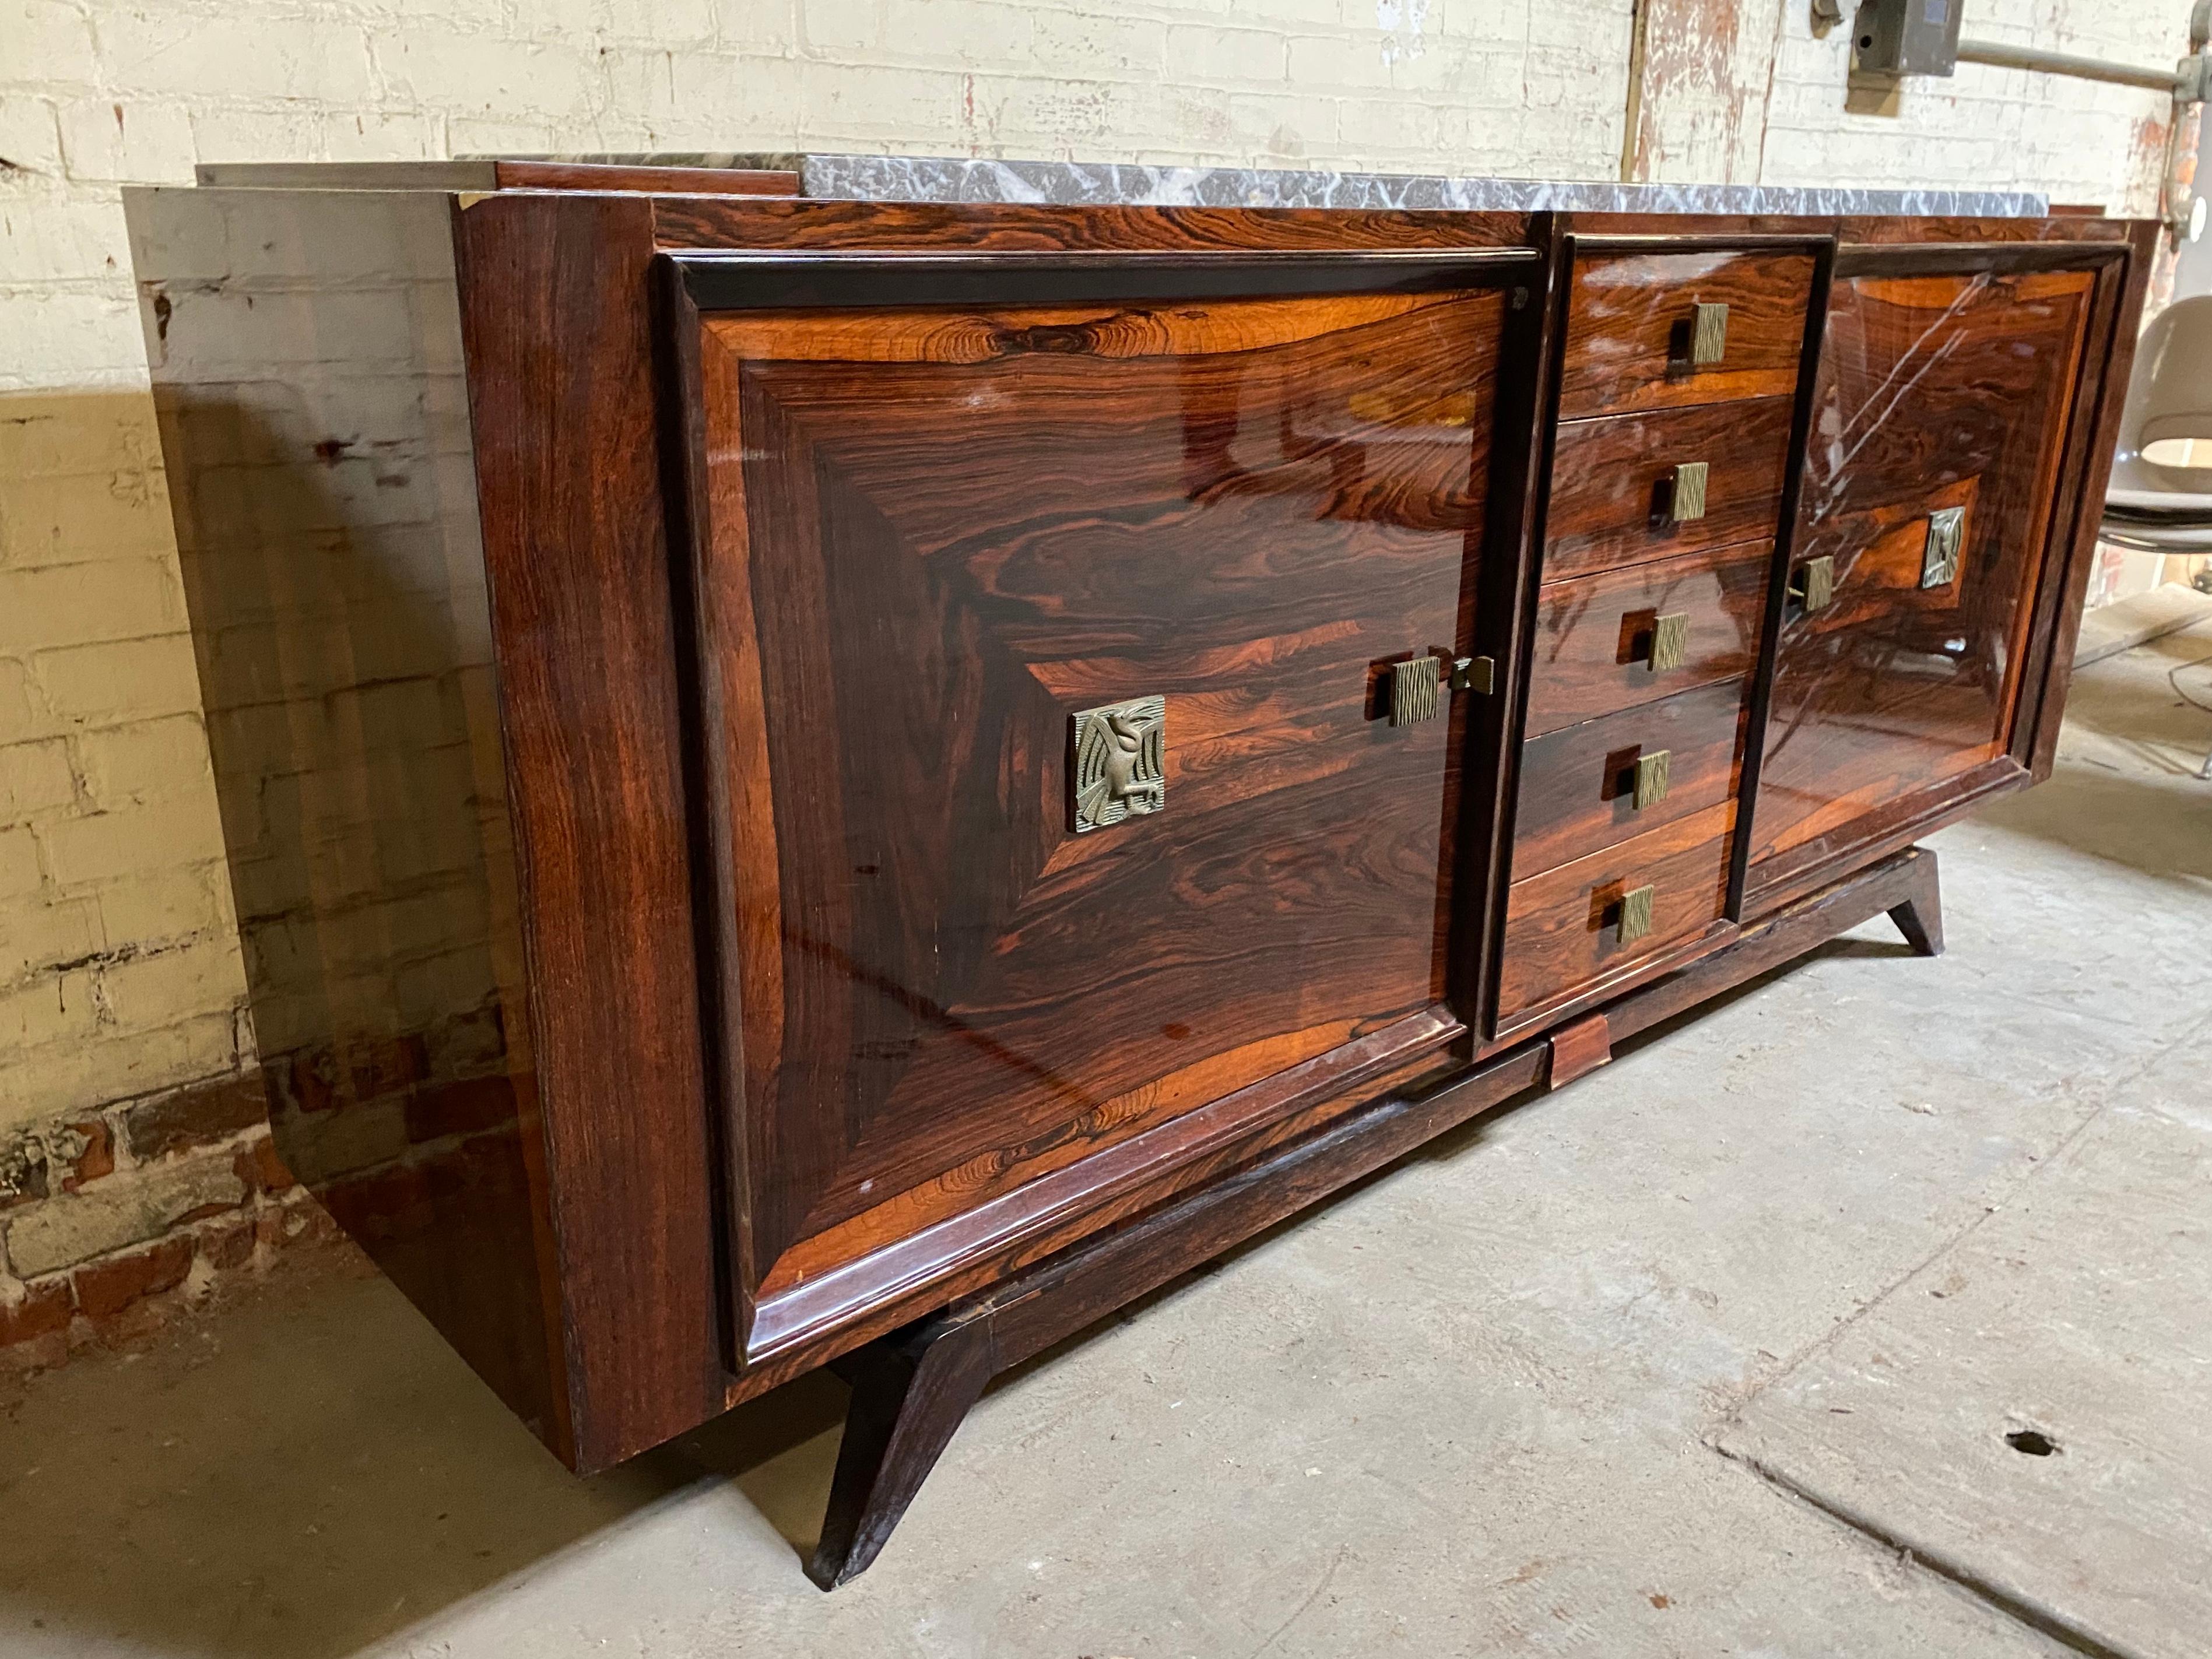 Stunning French Art Deco cabinet / sideboard done in striking grained Macassar ebony, featuring cabinet door pulls in cast bronze depicting stylized birds, and modernist drawer pulls, also retains white with gray marble top. Would surely enhance any